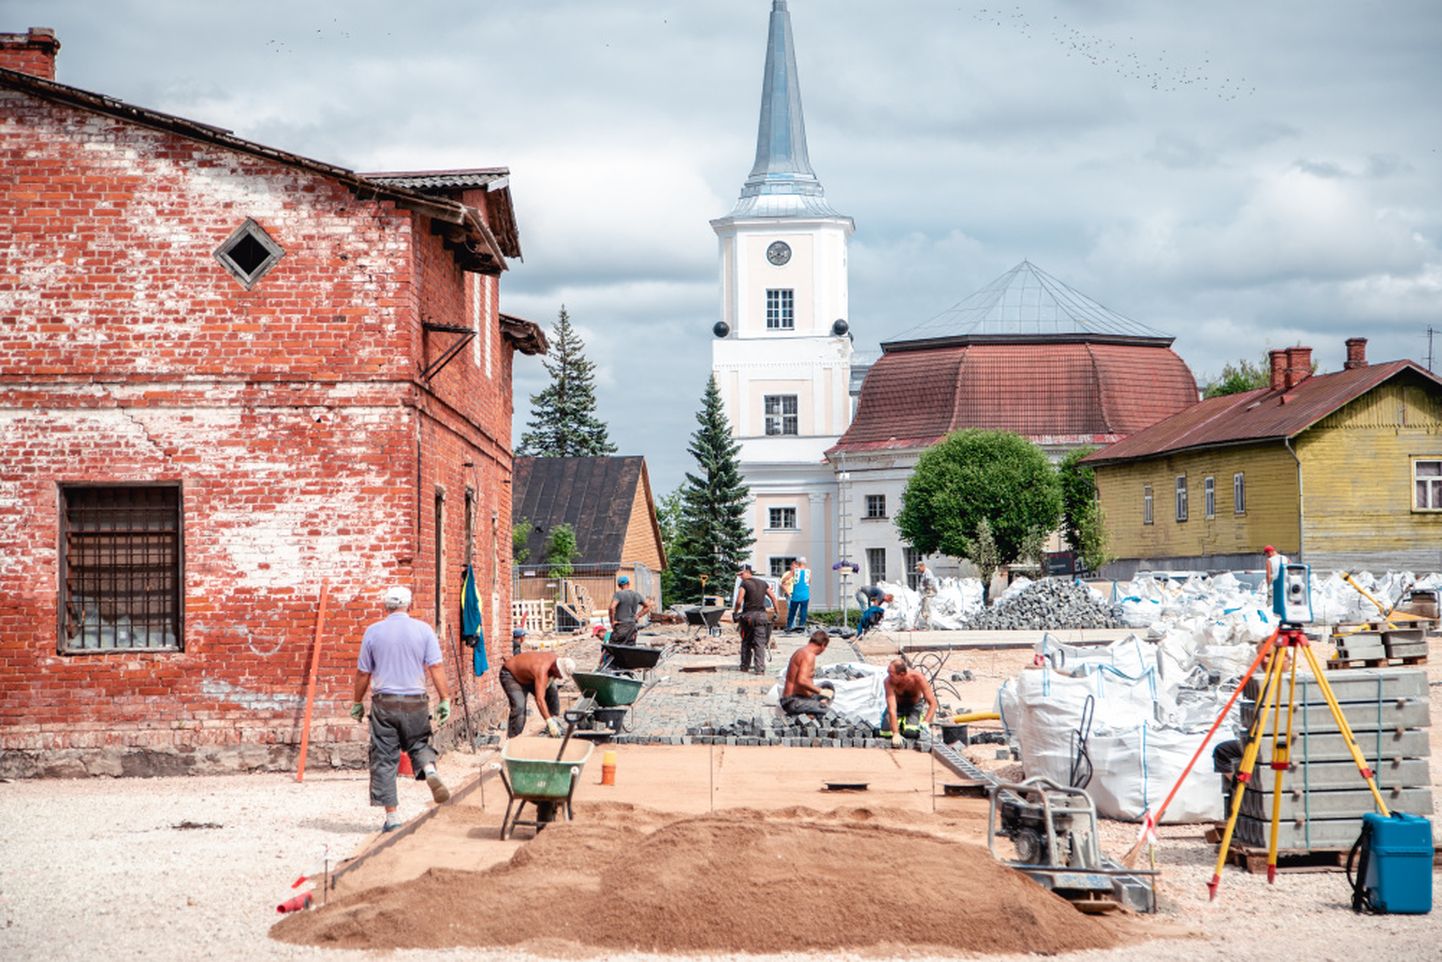 A non-motorized traffic route was constructed from Jaani Church in Valga to Lugaži Church in Valka in 2018. The path is not quite straight. The section in Valga was completed first. A visually disturbing half-demolished building at 19 Kesk Street cannot be demolished because it is in a heritage conservation area. The building belongs to the city. According to Urmas Möldre from Valga town government, the building cannot be renovated as it lacks a foundation. "We have announced a building rights competition to find an owner who would do something with the building," Möldre said. The building at 15 Kesk Street, (on the right) belongs to a private individual who can renovate it if desired. Photo: Glänel Tirrand